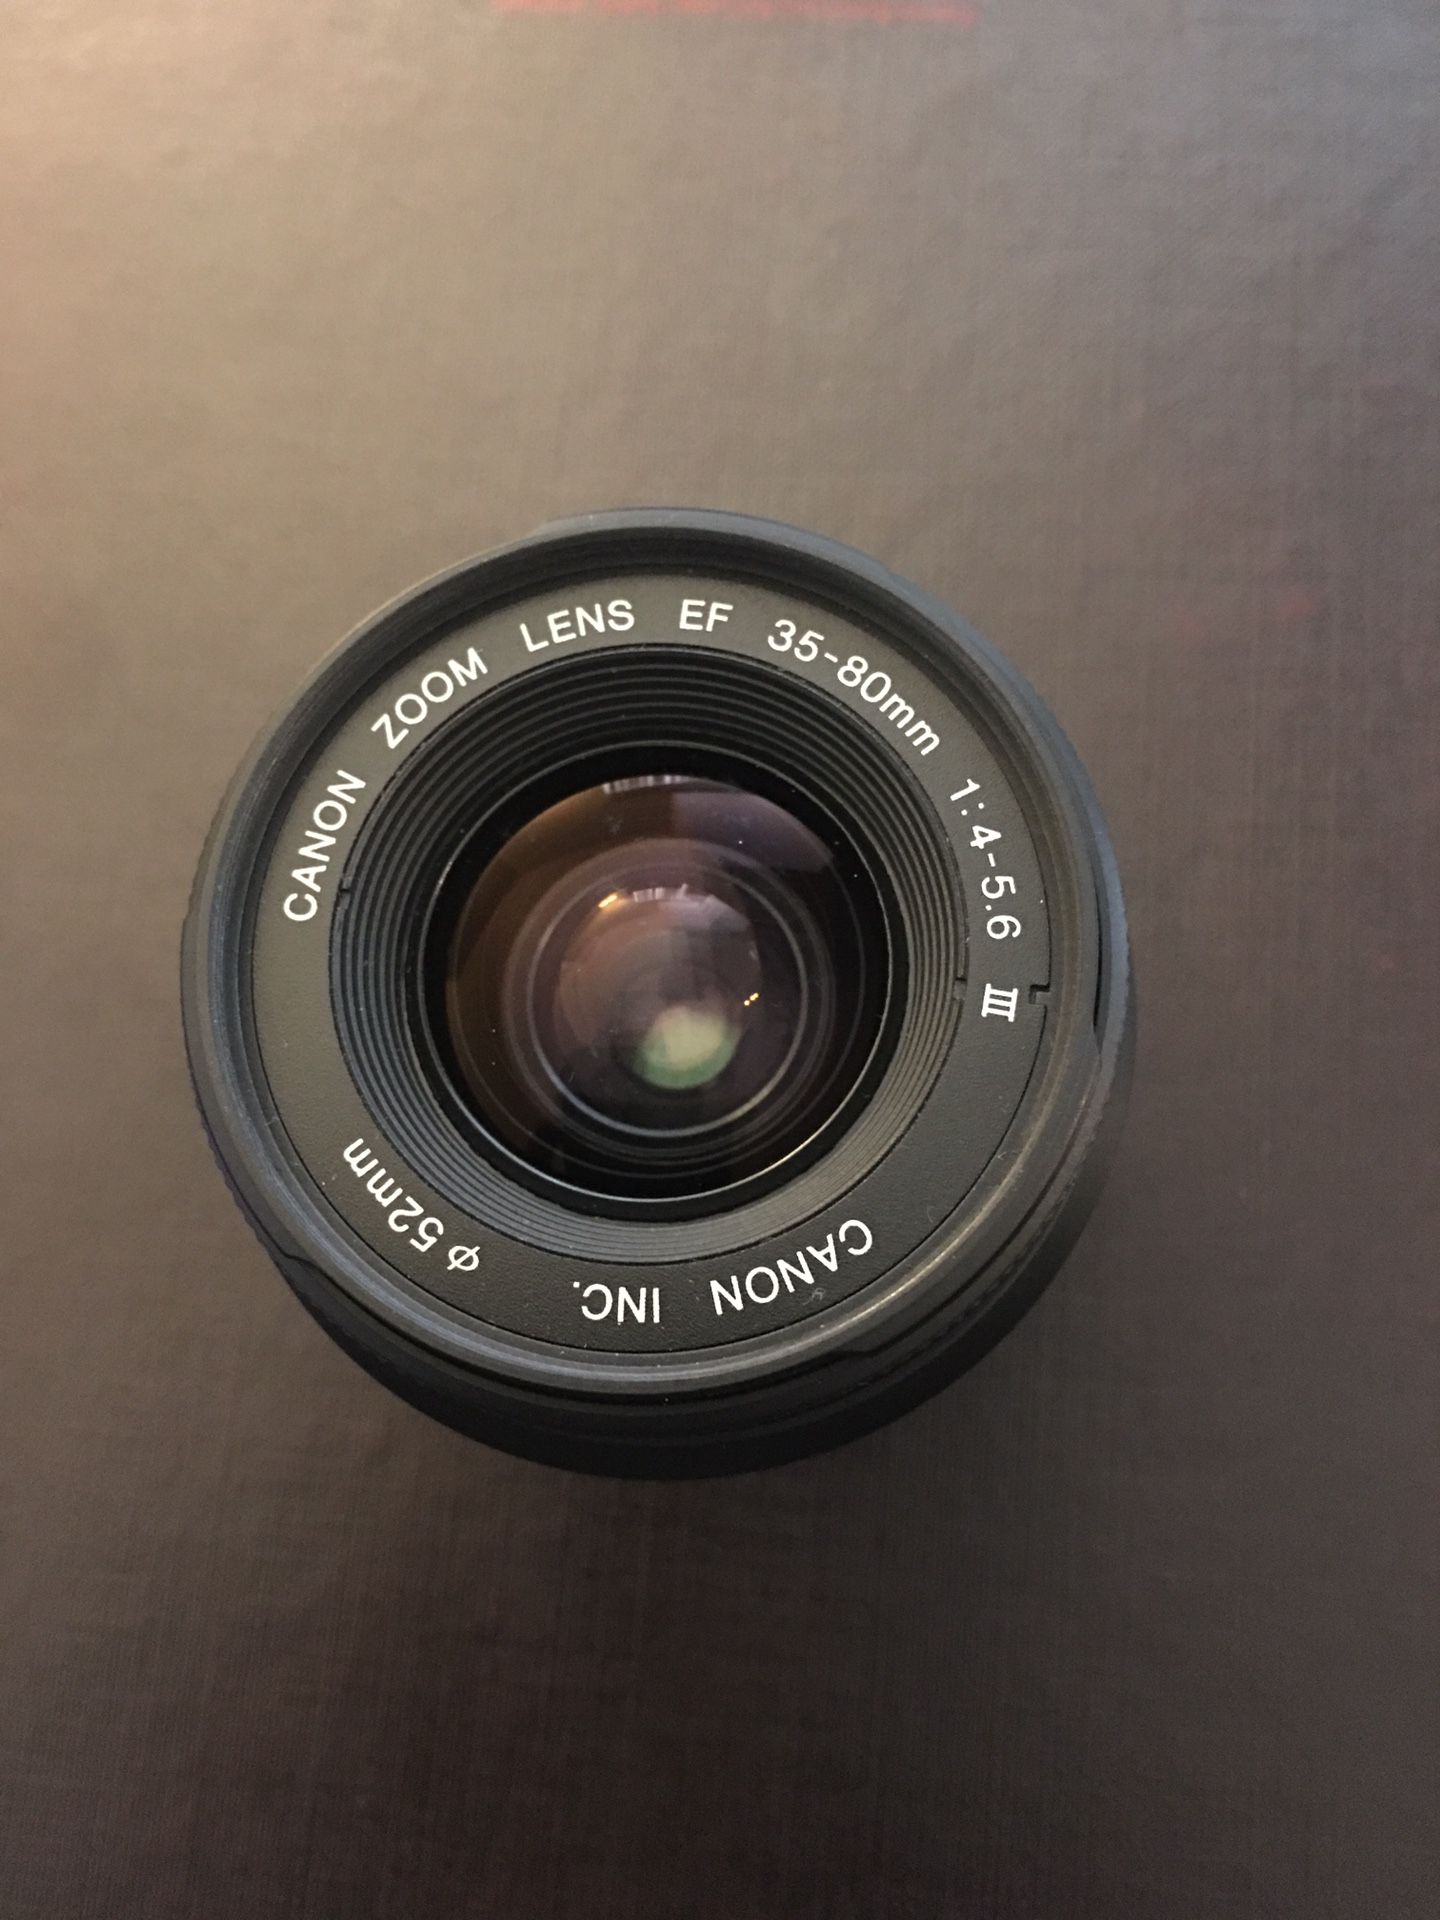 Canon 35-80mm, 4-5.6 zoom lens